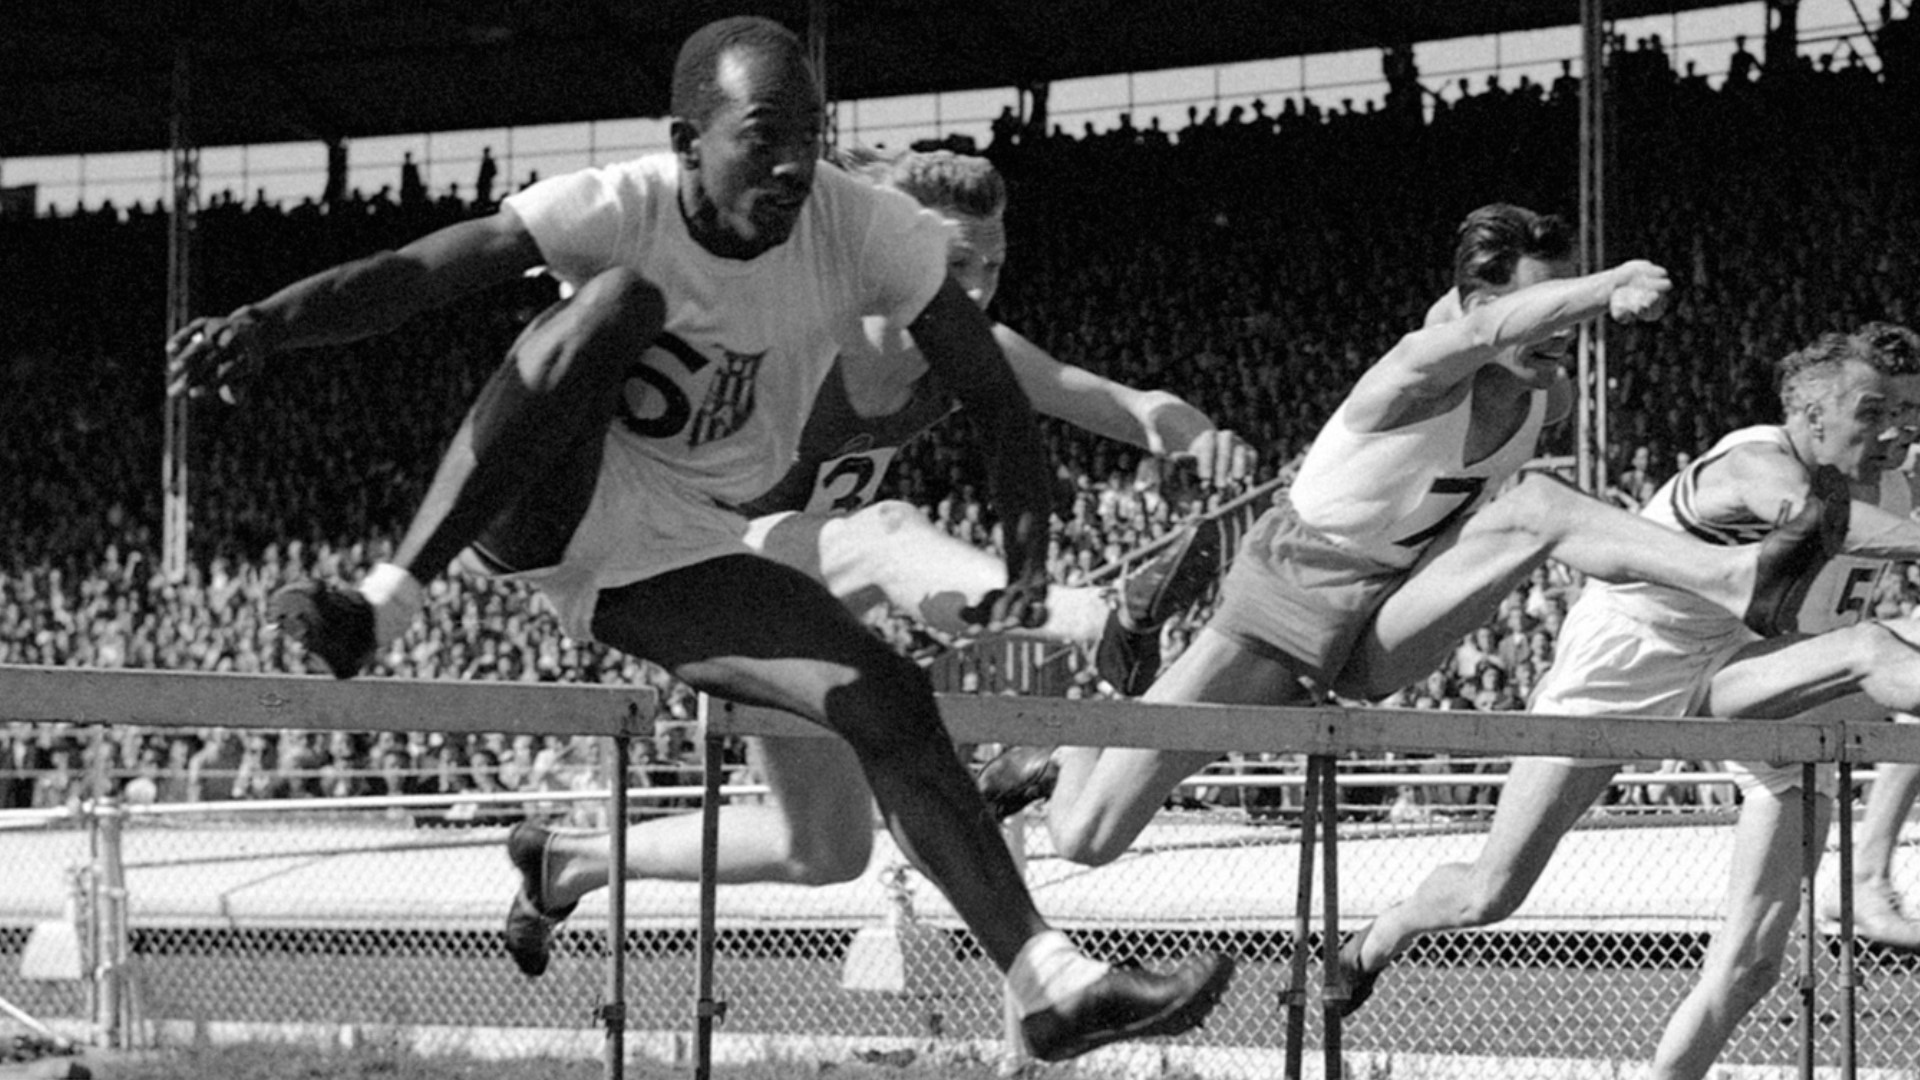 The track legend to this day remains the only athlete in Olympic history to win gold medals in both the sprints and hurdles.